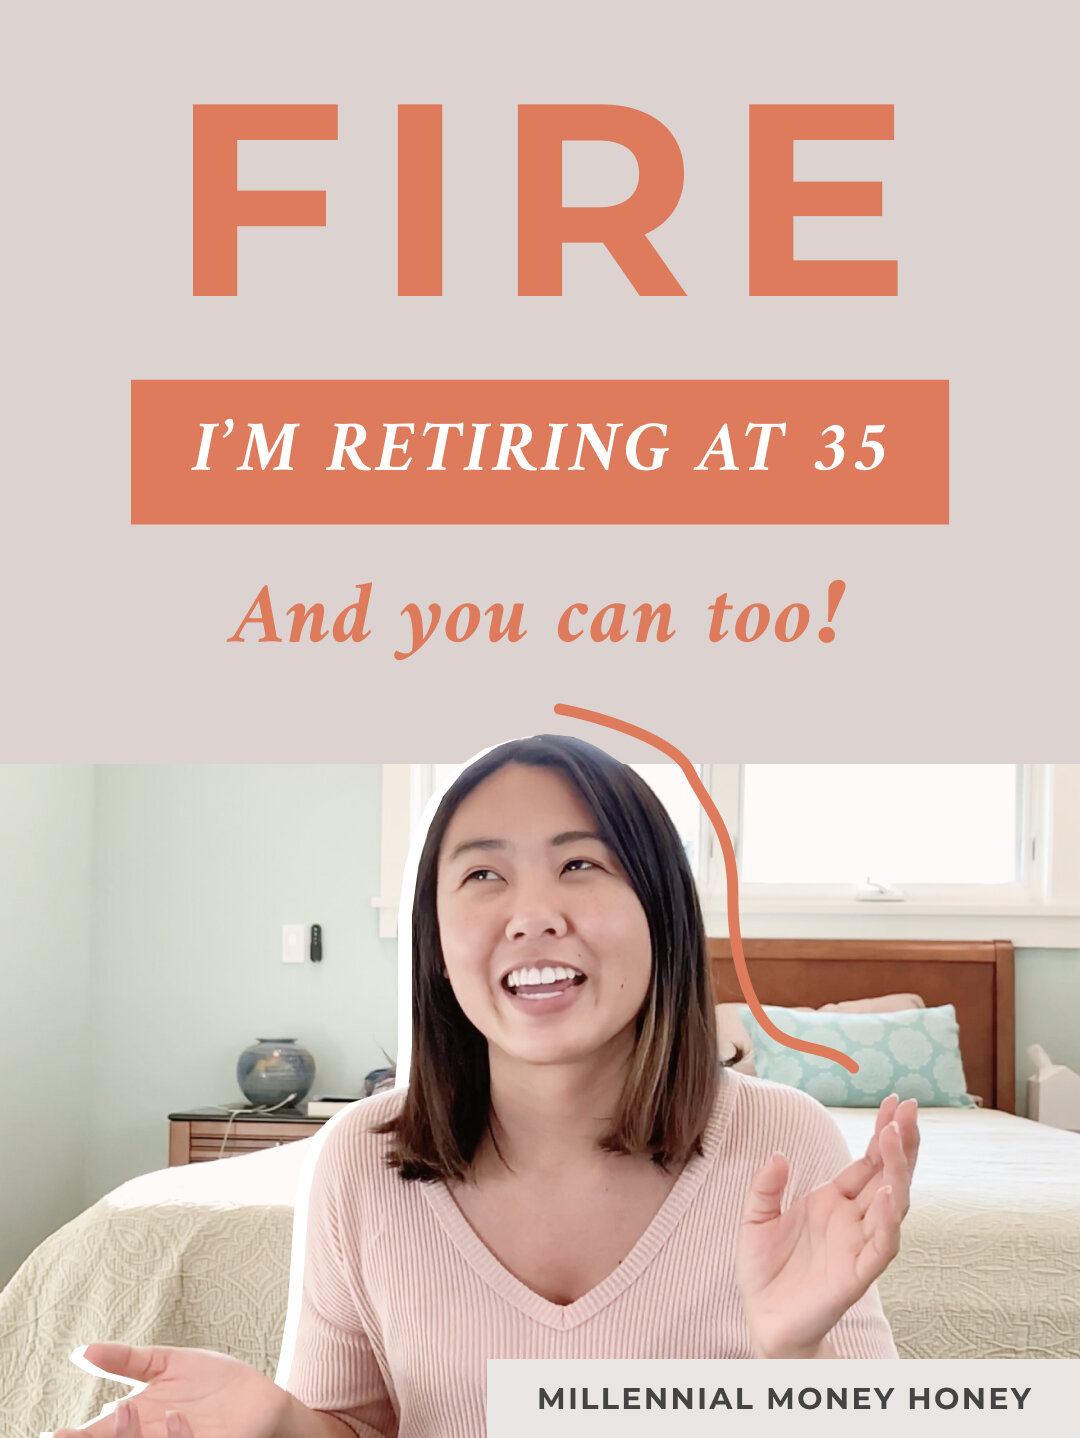 How much money do i need to retire at 35 I M Retiring At 35 Financial Independence Retire Early Fire Millennial Money Honey